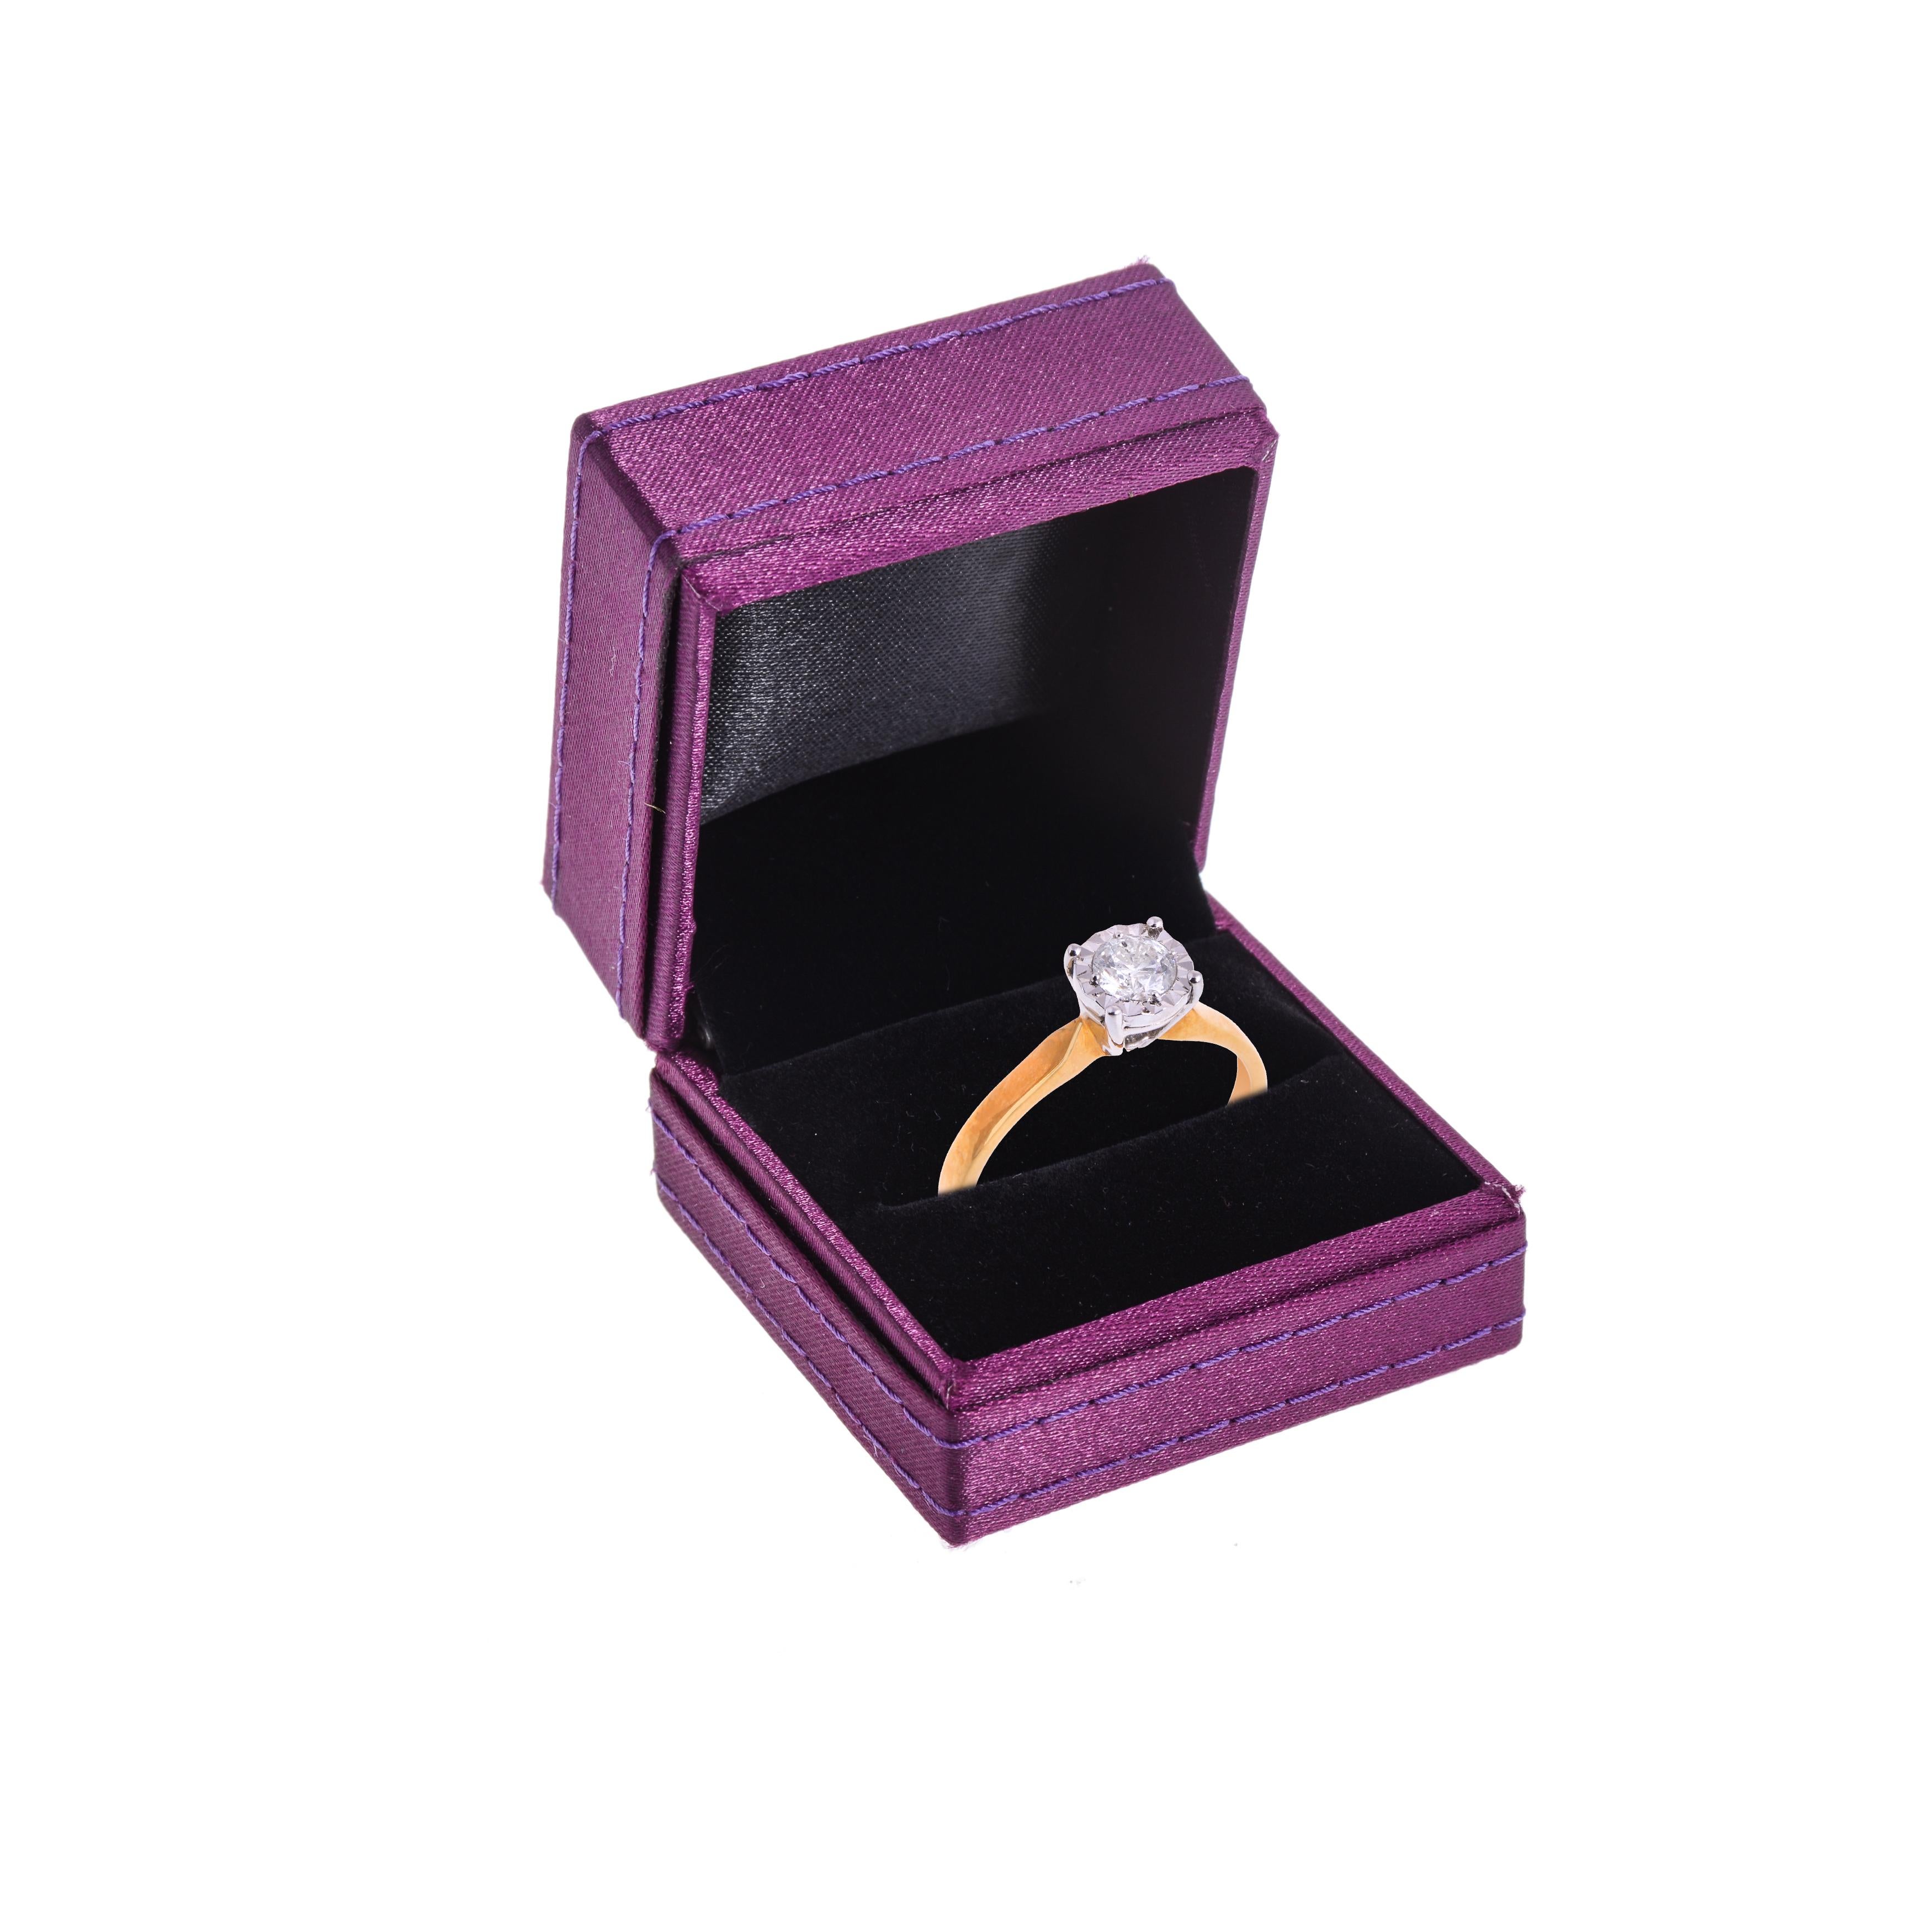 A solitaire ring in illusion setting set in 18ct yellow gold. perfectly suitable for anniversary or Christmas present to your lady.

Centre Diamond: 0.35ct

Colour, Clarity: H Si1

Metal Purity: 18ct Yellow Gold

British Hallmarked